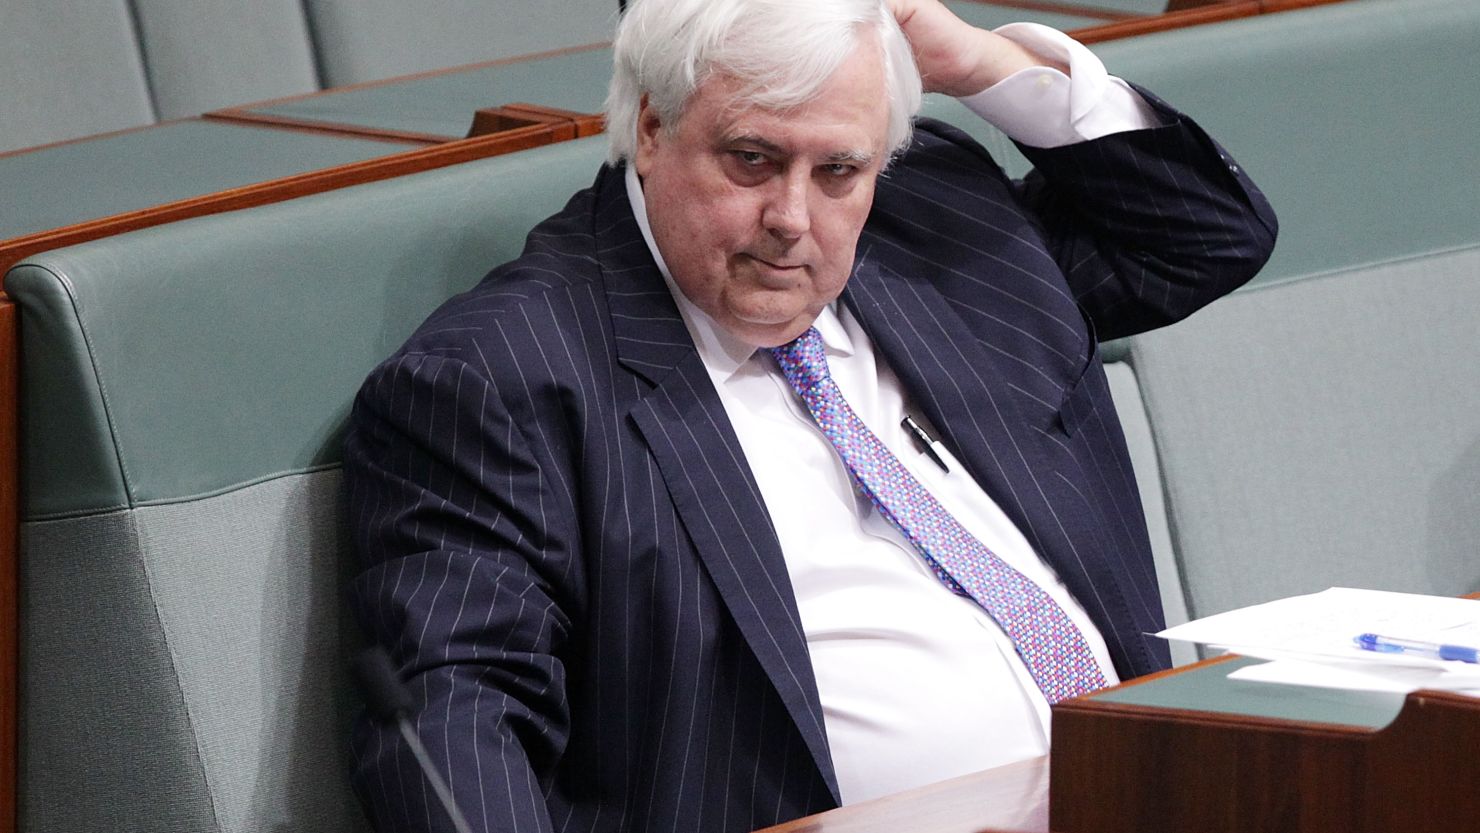 Leader of the Palmer United Party Clive Palmer during Question Time at Parliament House on July 15, 2014 in Canberra.